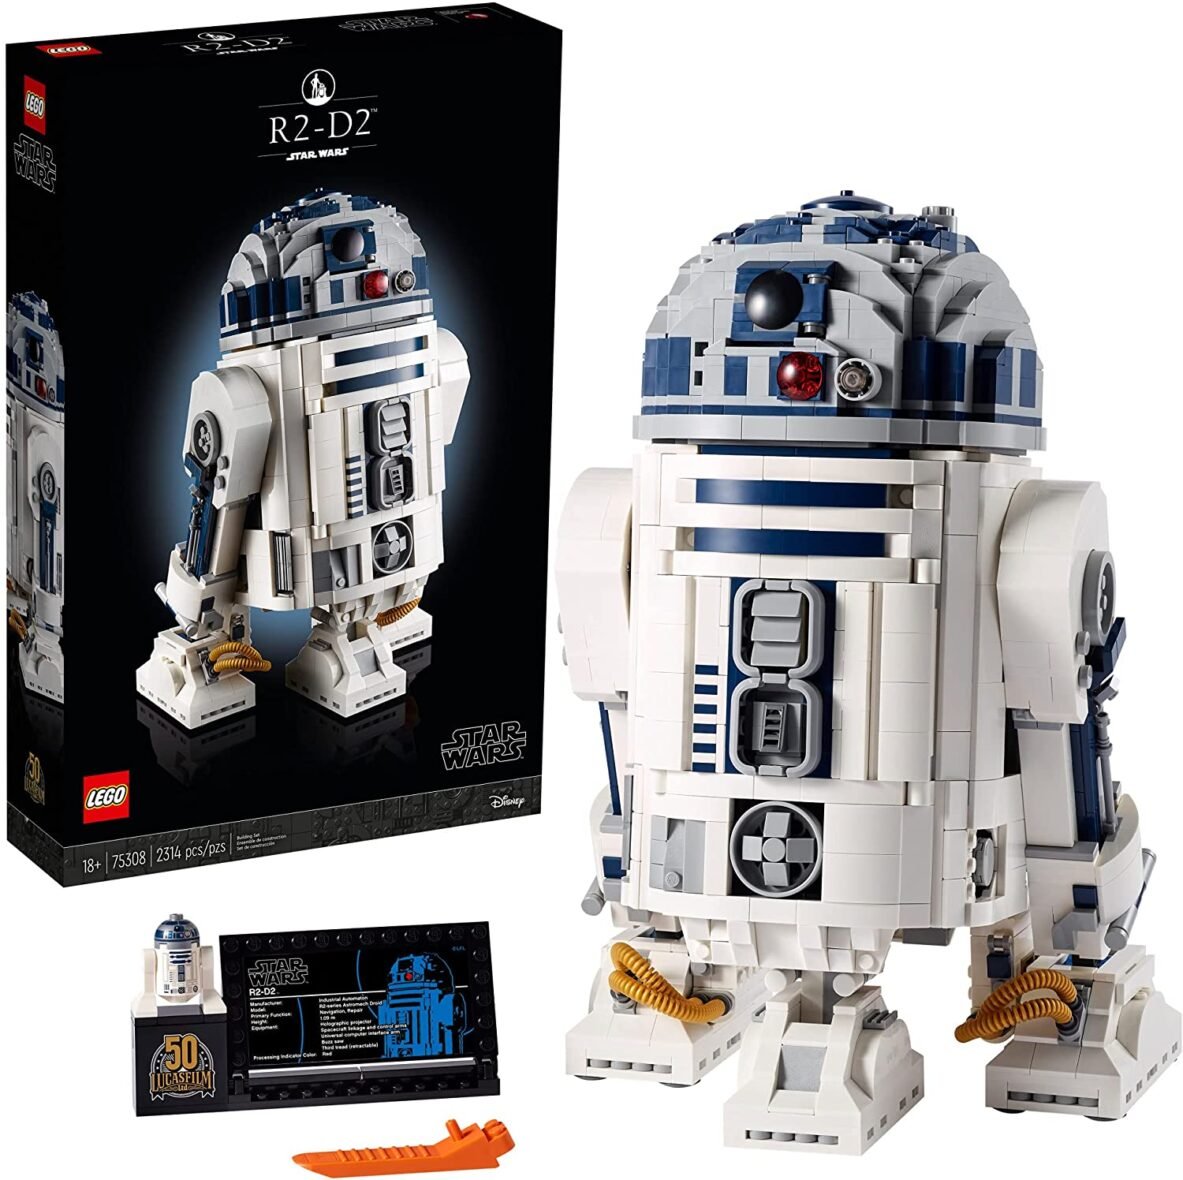 LEGO Star Wars R2-D2 75308 Collectible Building Toy, (2,315 Pieces)